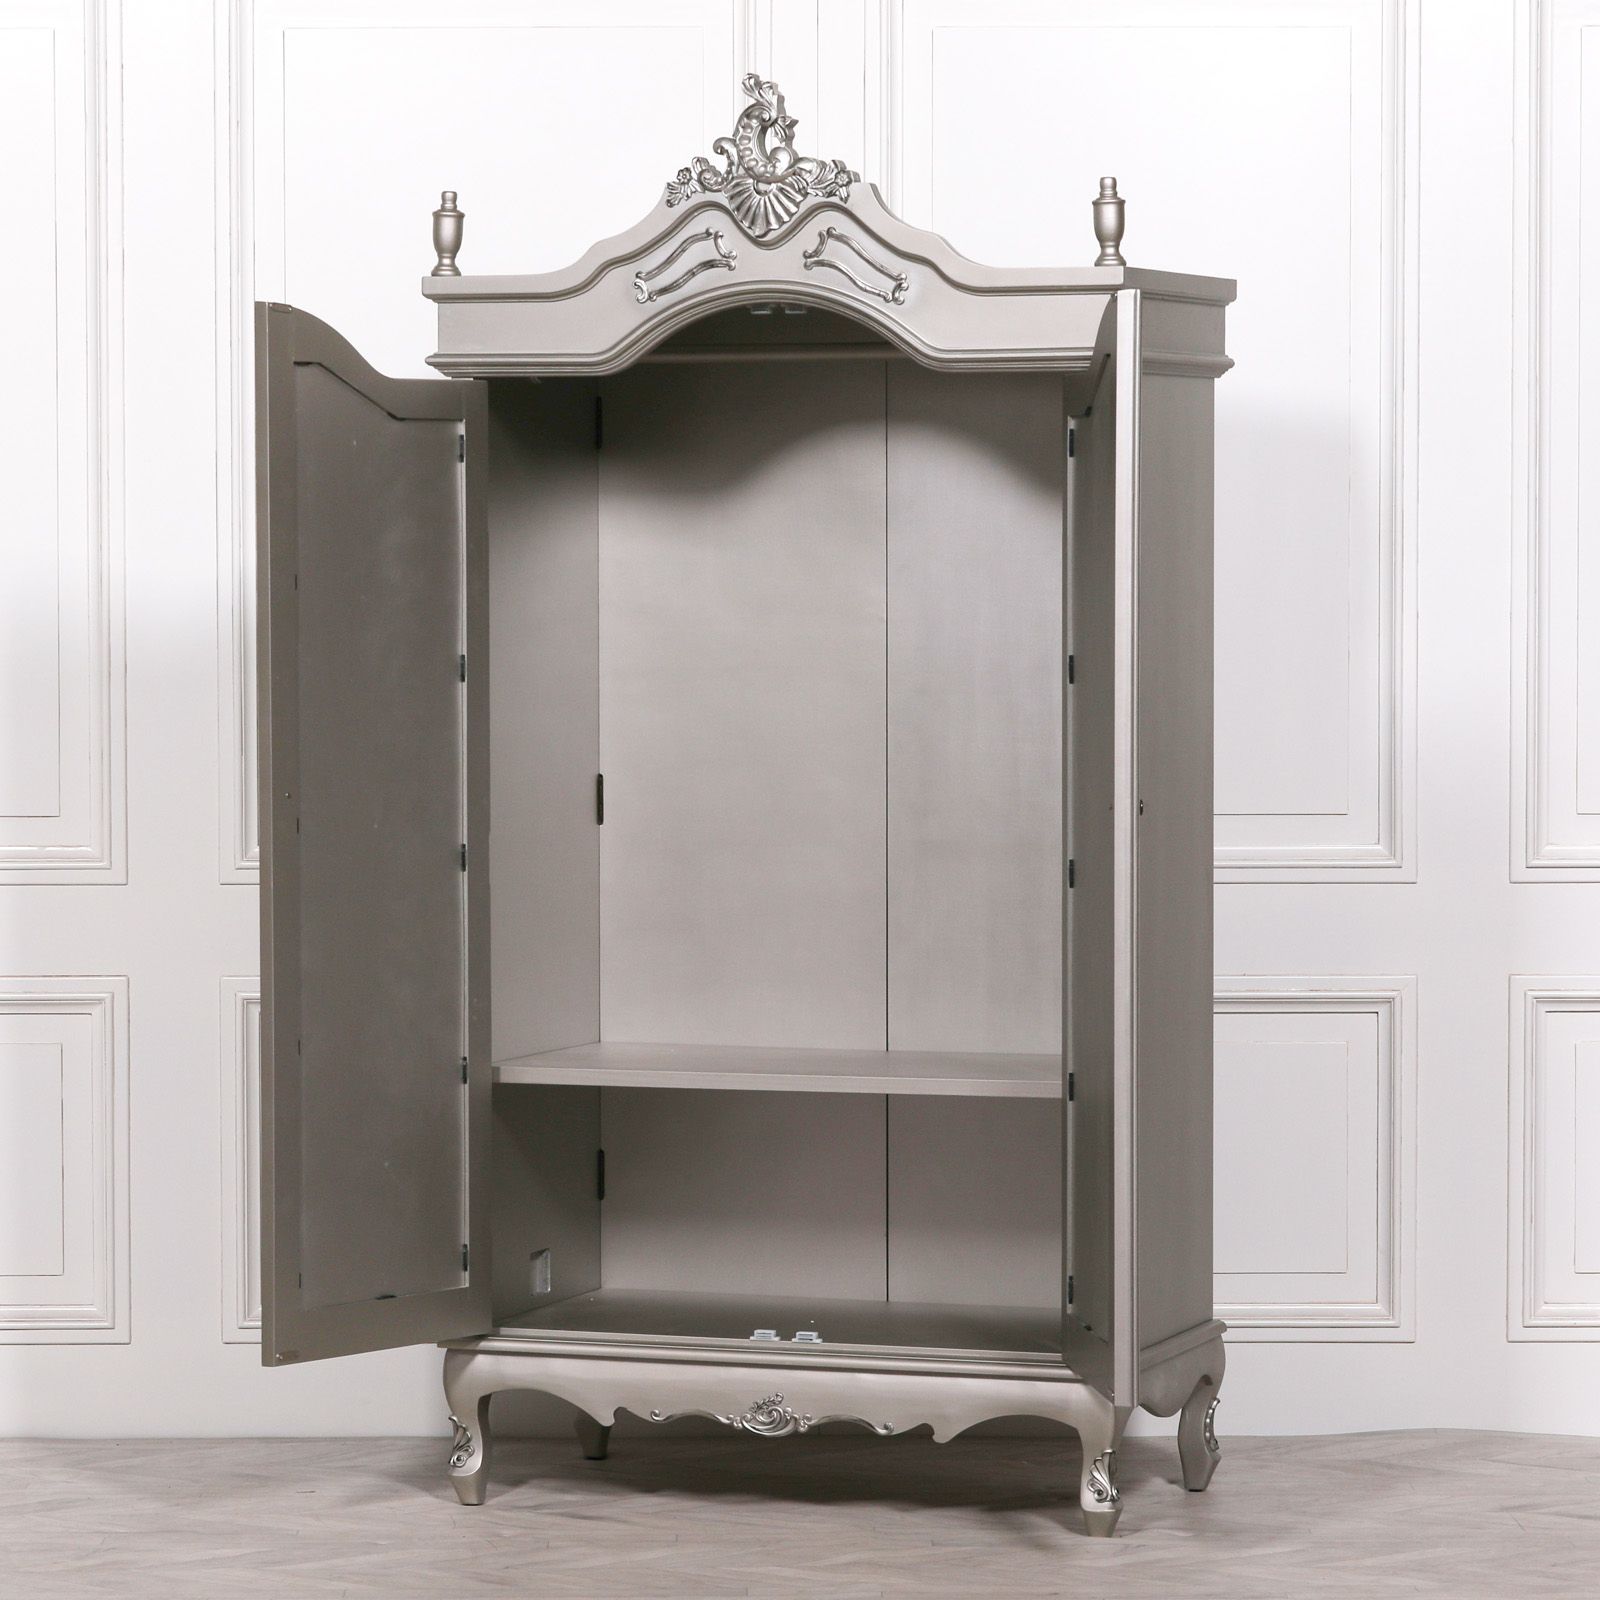 French Style Double Armoire Silver Wardrobe Mirrored Doors With Regard To Silver French Wardrobes (View 6 of 20)